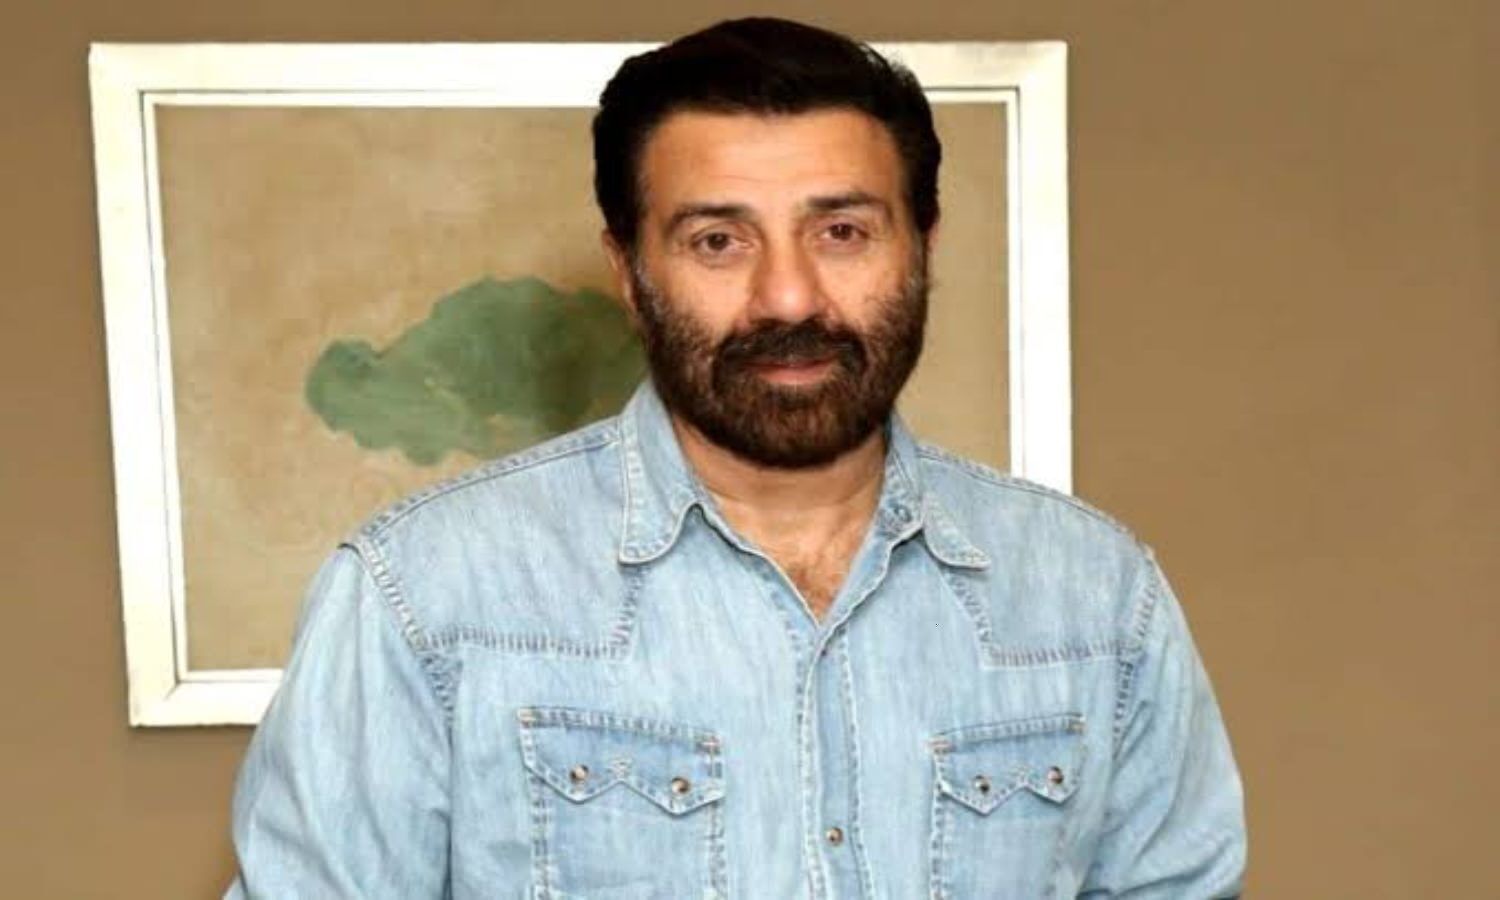 Sunny Deol said that remakes of any film do not work in Bollywood because they have "Soul" would not have